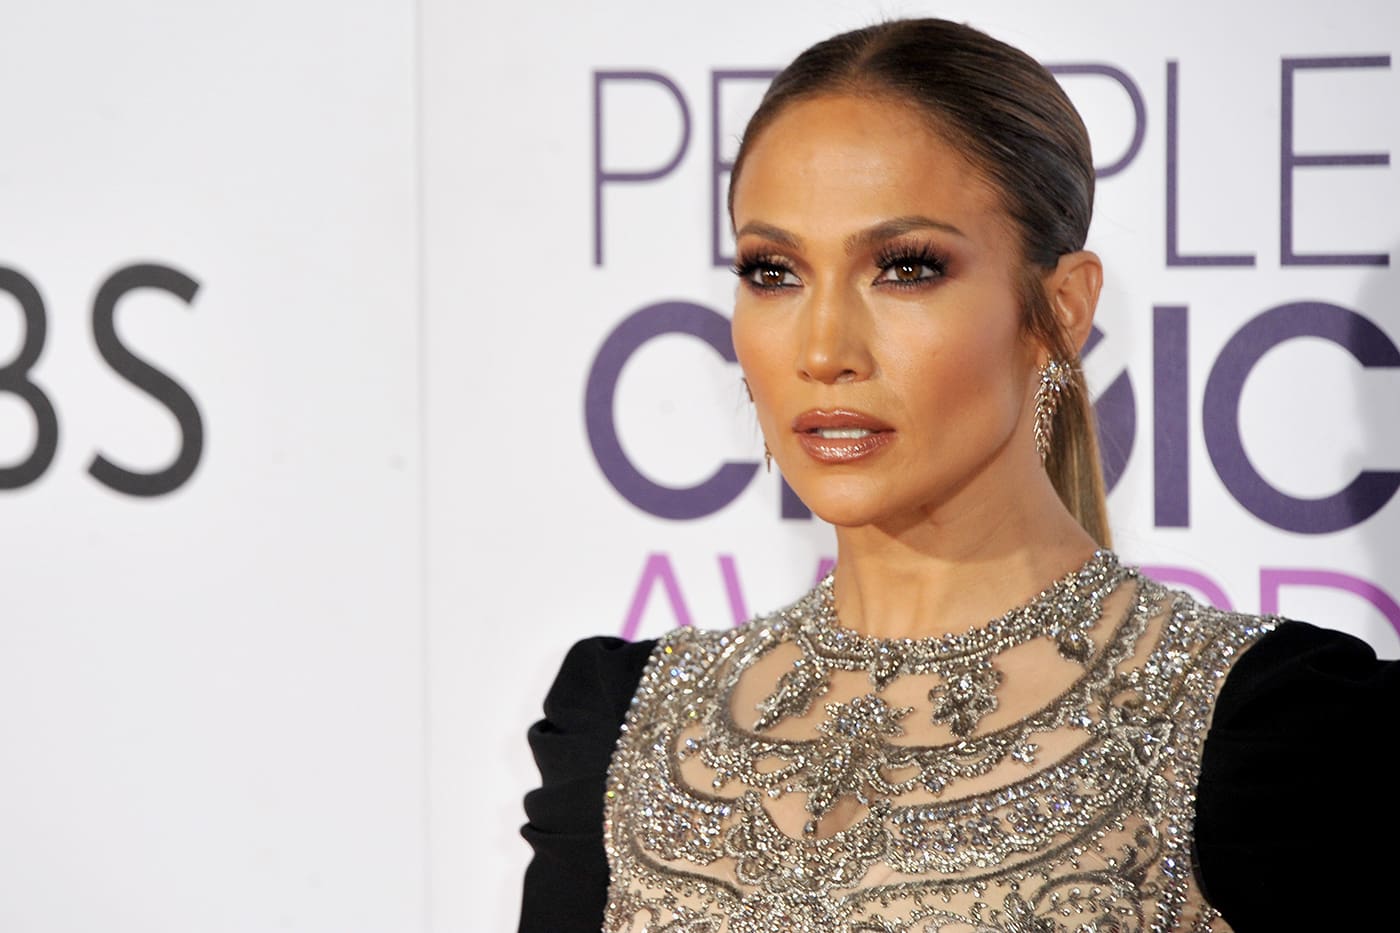 J Lo Shows Off Her Toned Body In A Tiny White Swimsuit - Check Out Her Gorgeous Curves